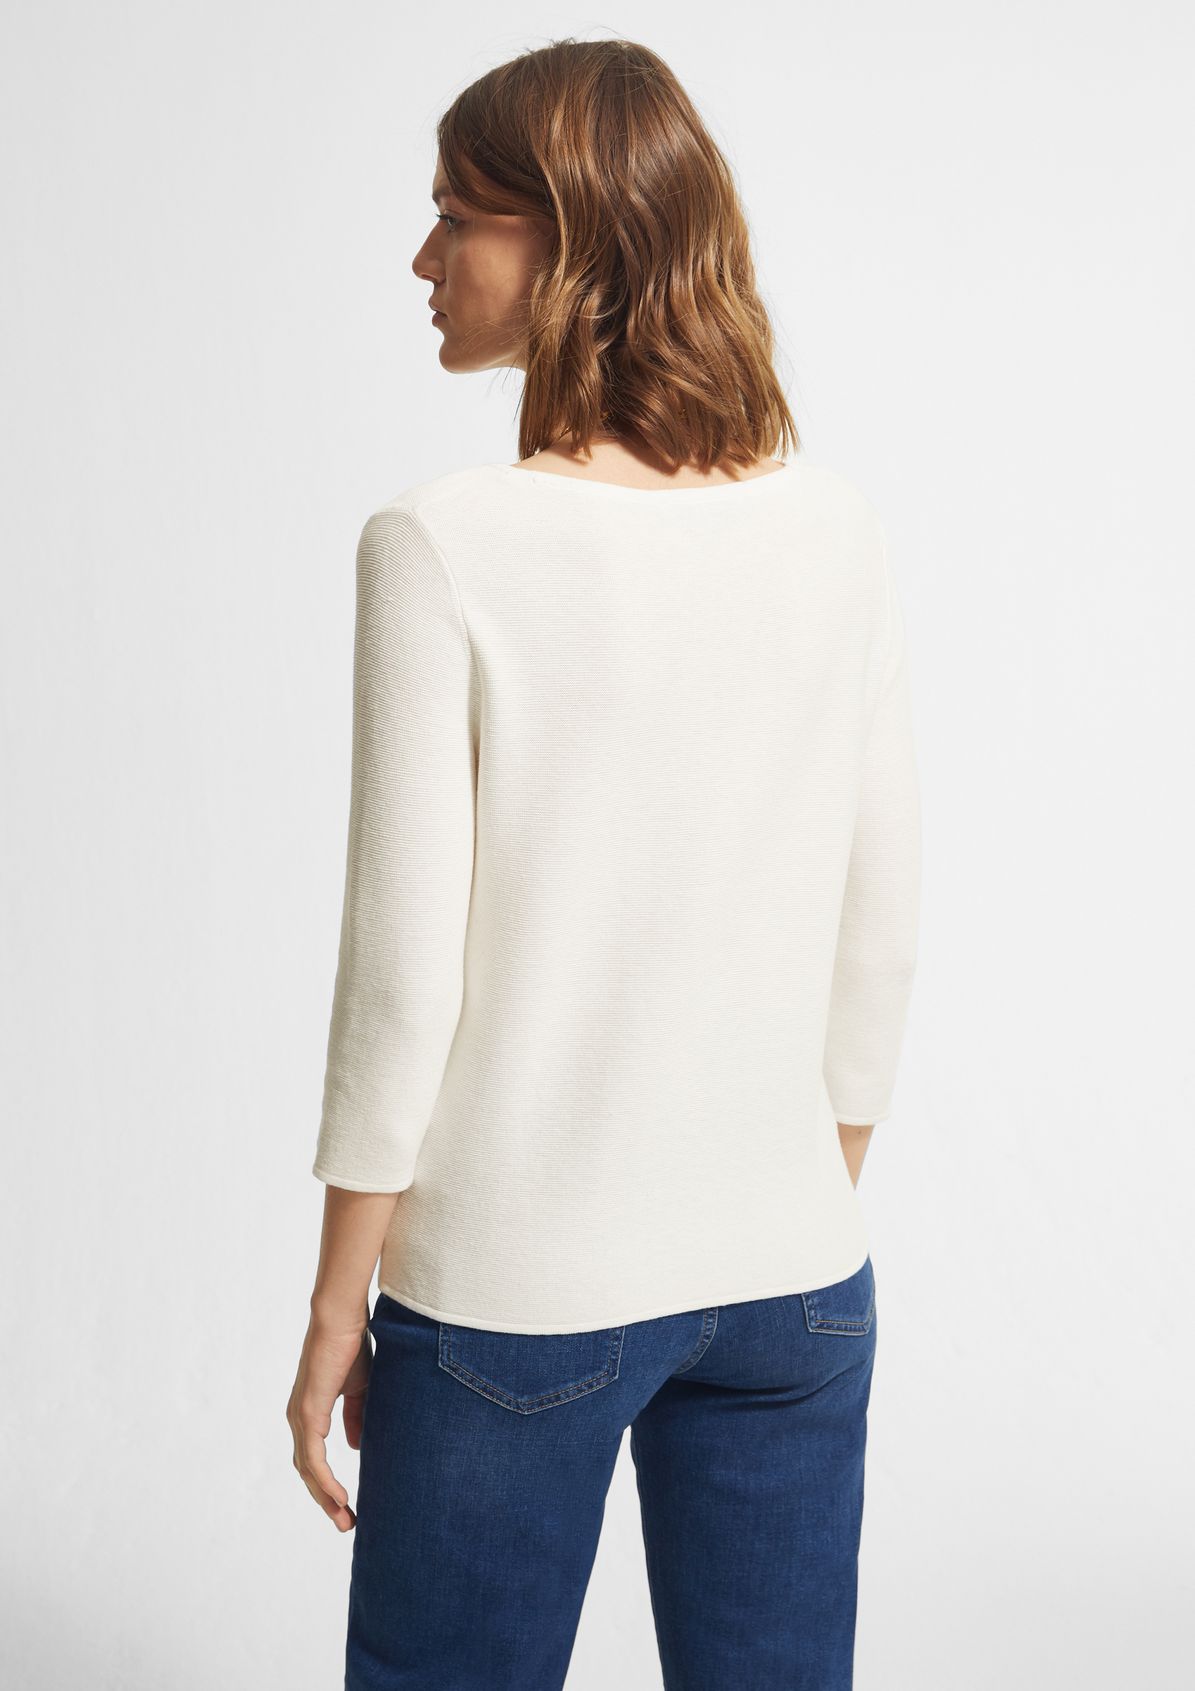 Soft jumper with a knit texture from comma